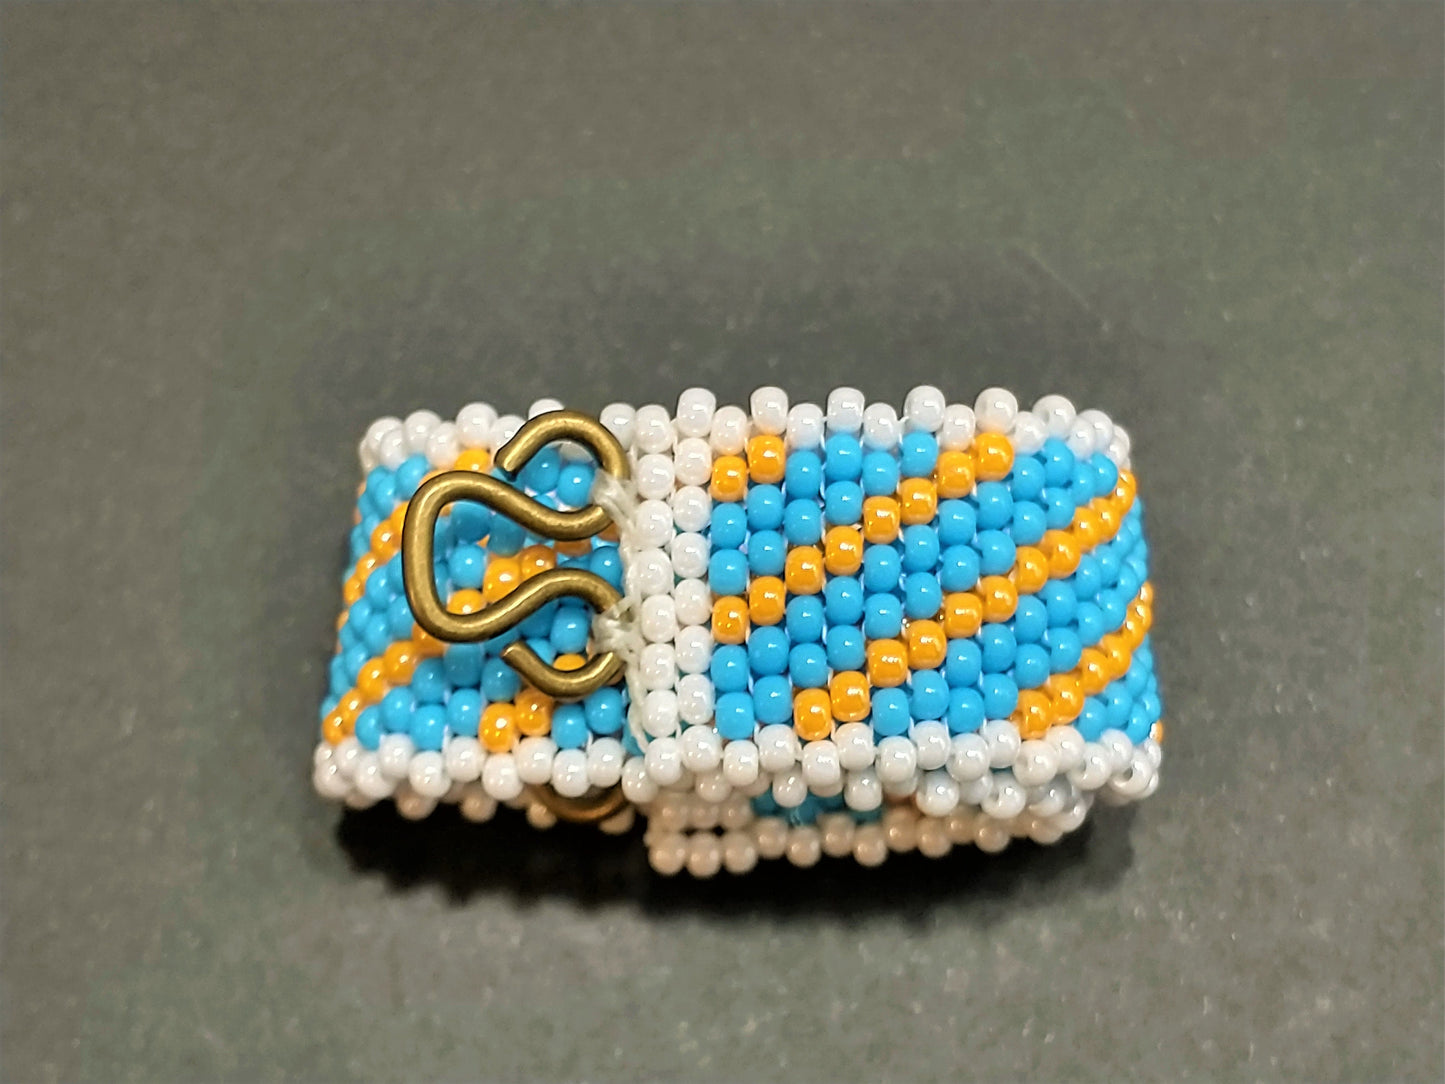 Wide Cuff Beaded Bracelet | 90s Aesthetic | Woven Beadwork | Colorful Boho Statement Bracelet | One Of A Kind Gift | Boutique Jewelry Gift